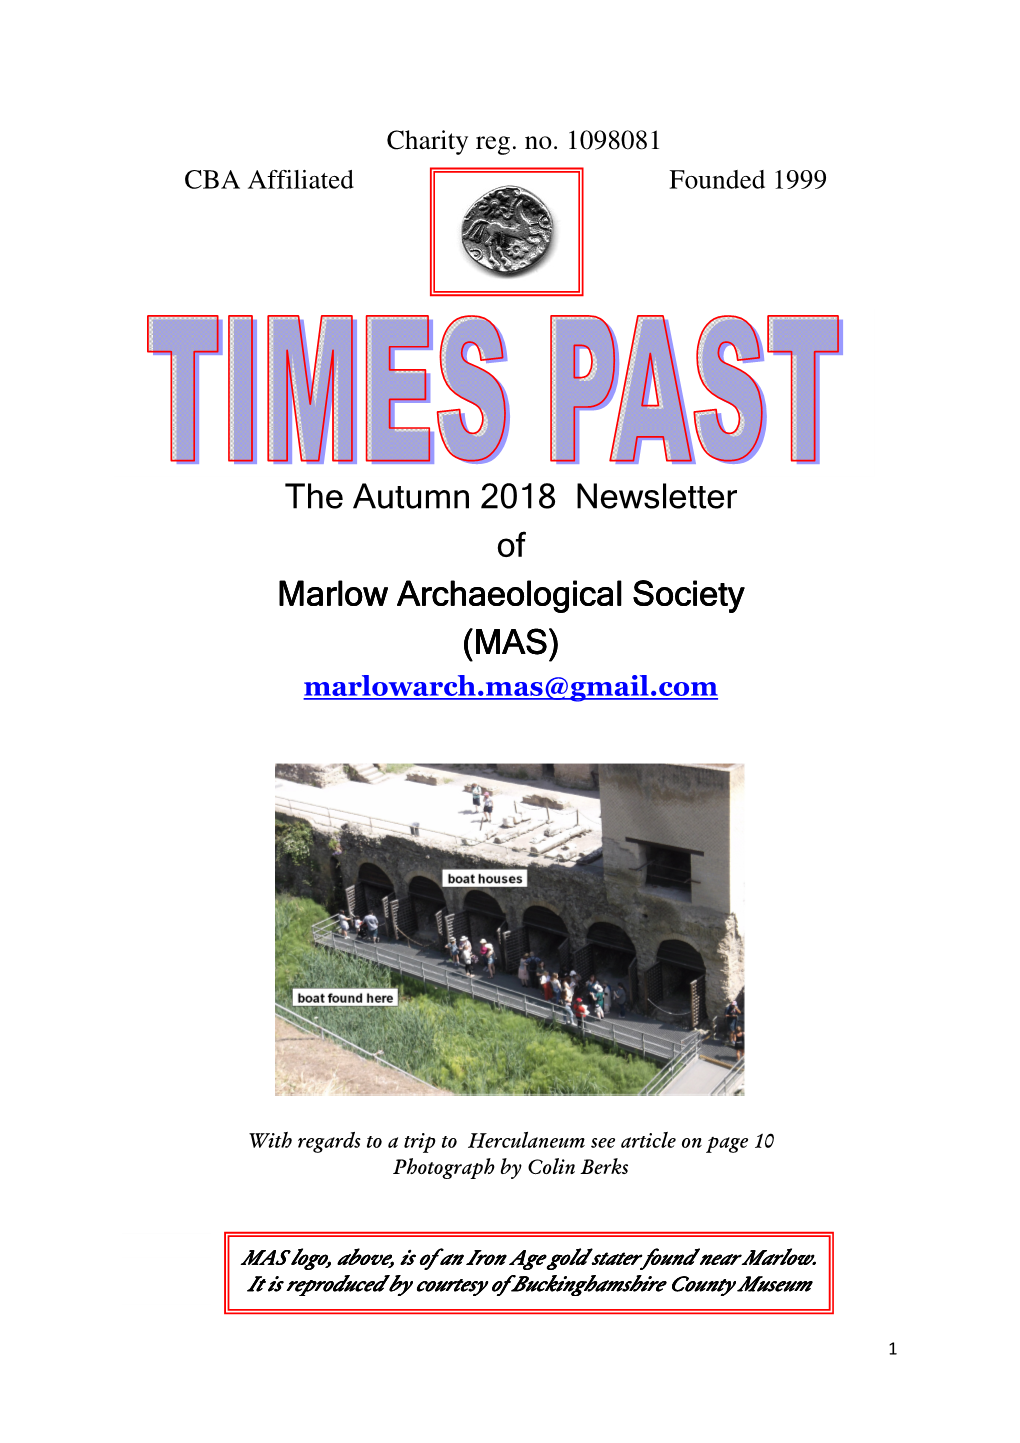 The Autumn 2018 Newsletter of Marlow Archaeological Society (MAS) Marlowarch.Mas@Gmail.Com